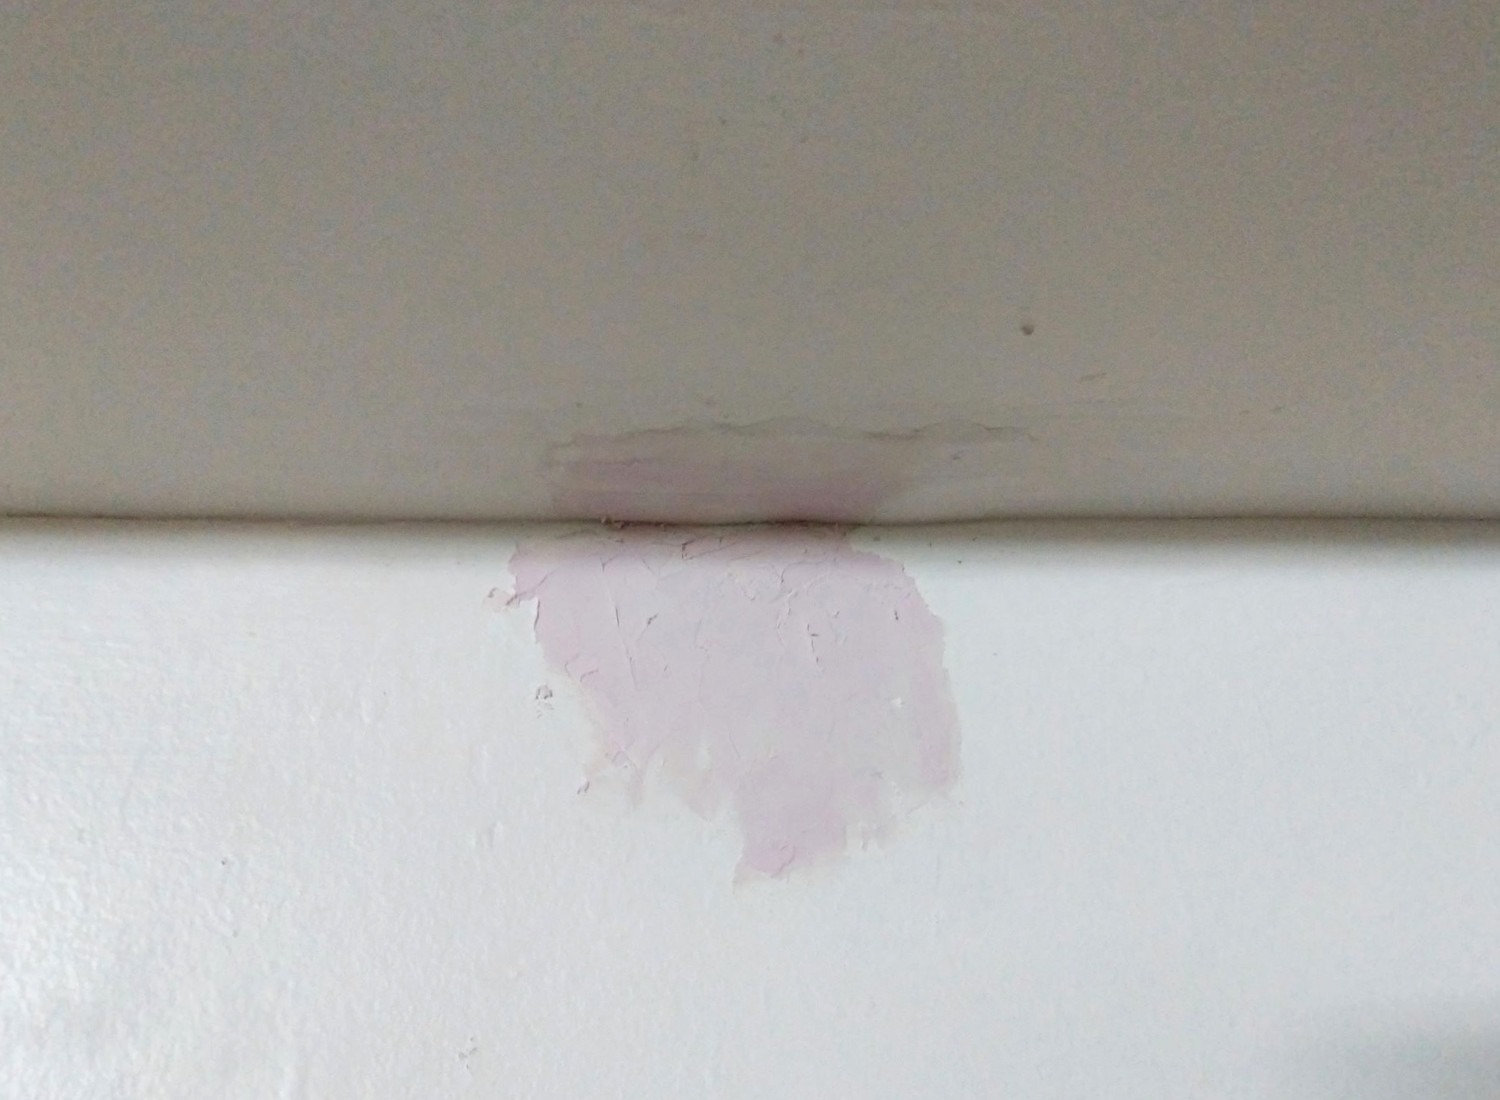 a hole in drywall covered and repaired with putty